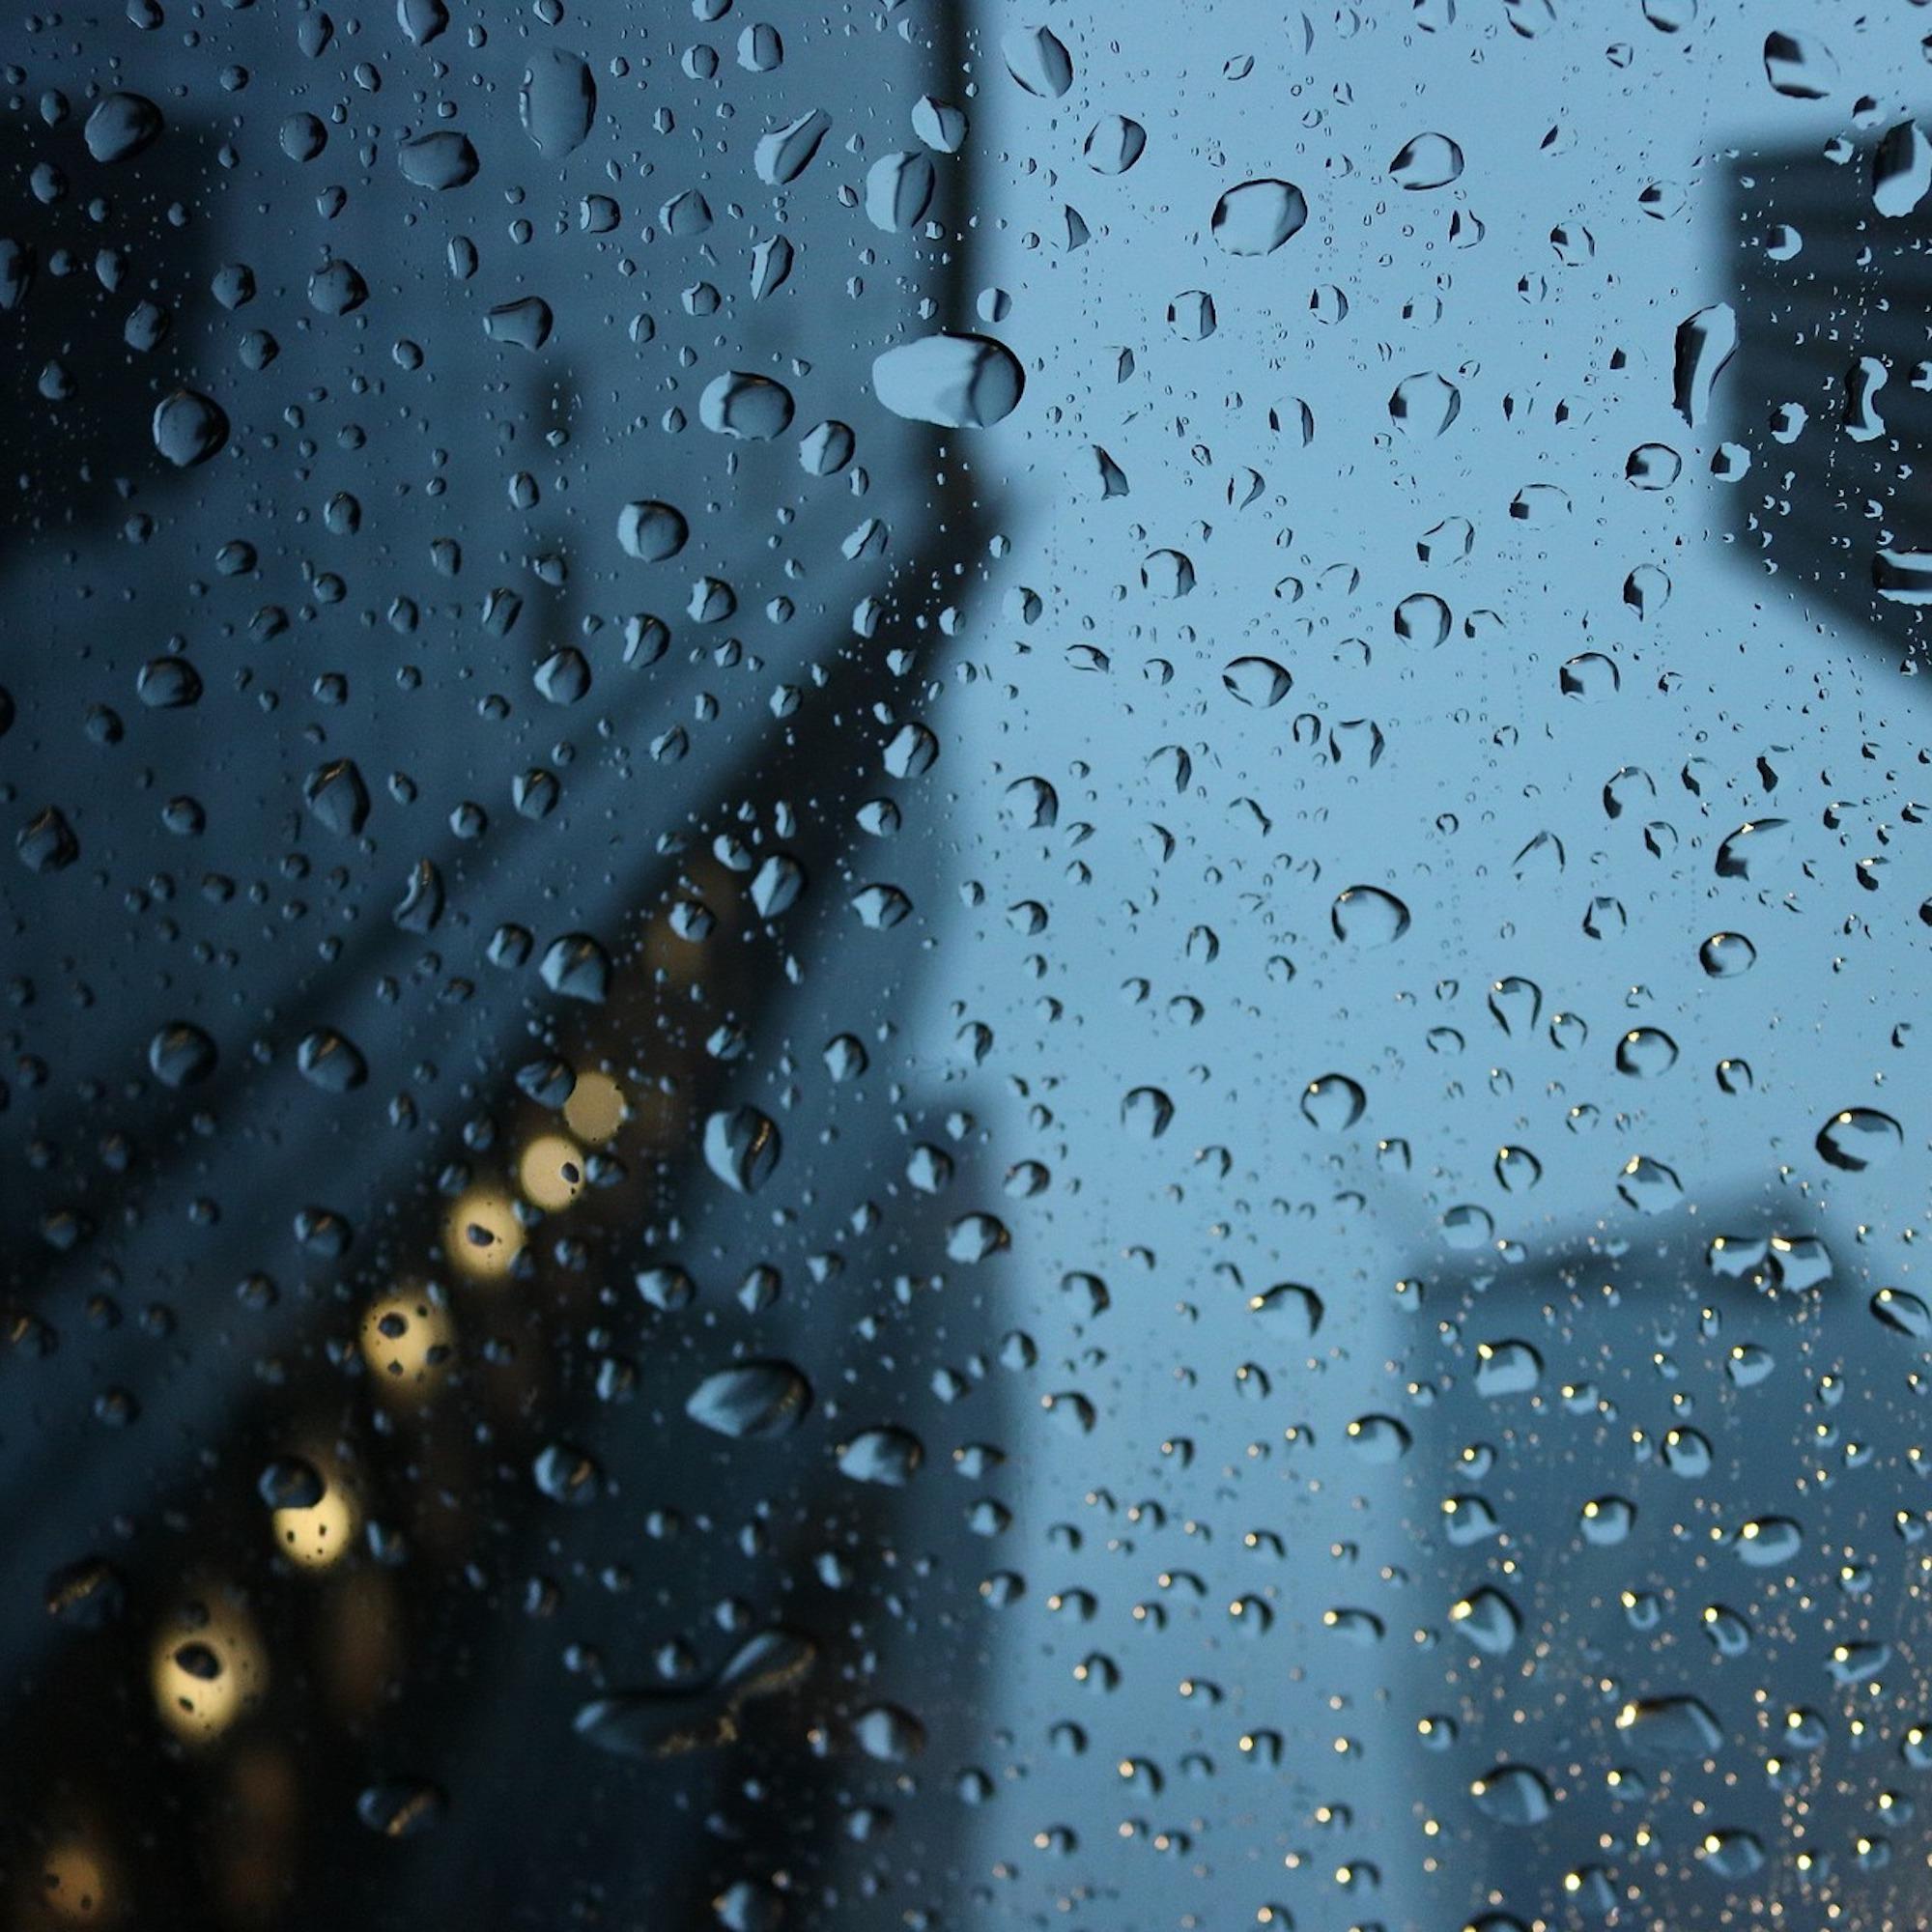 10 Unforgettable Rain Sounds to Soothe You to Sleep (Loopable)